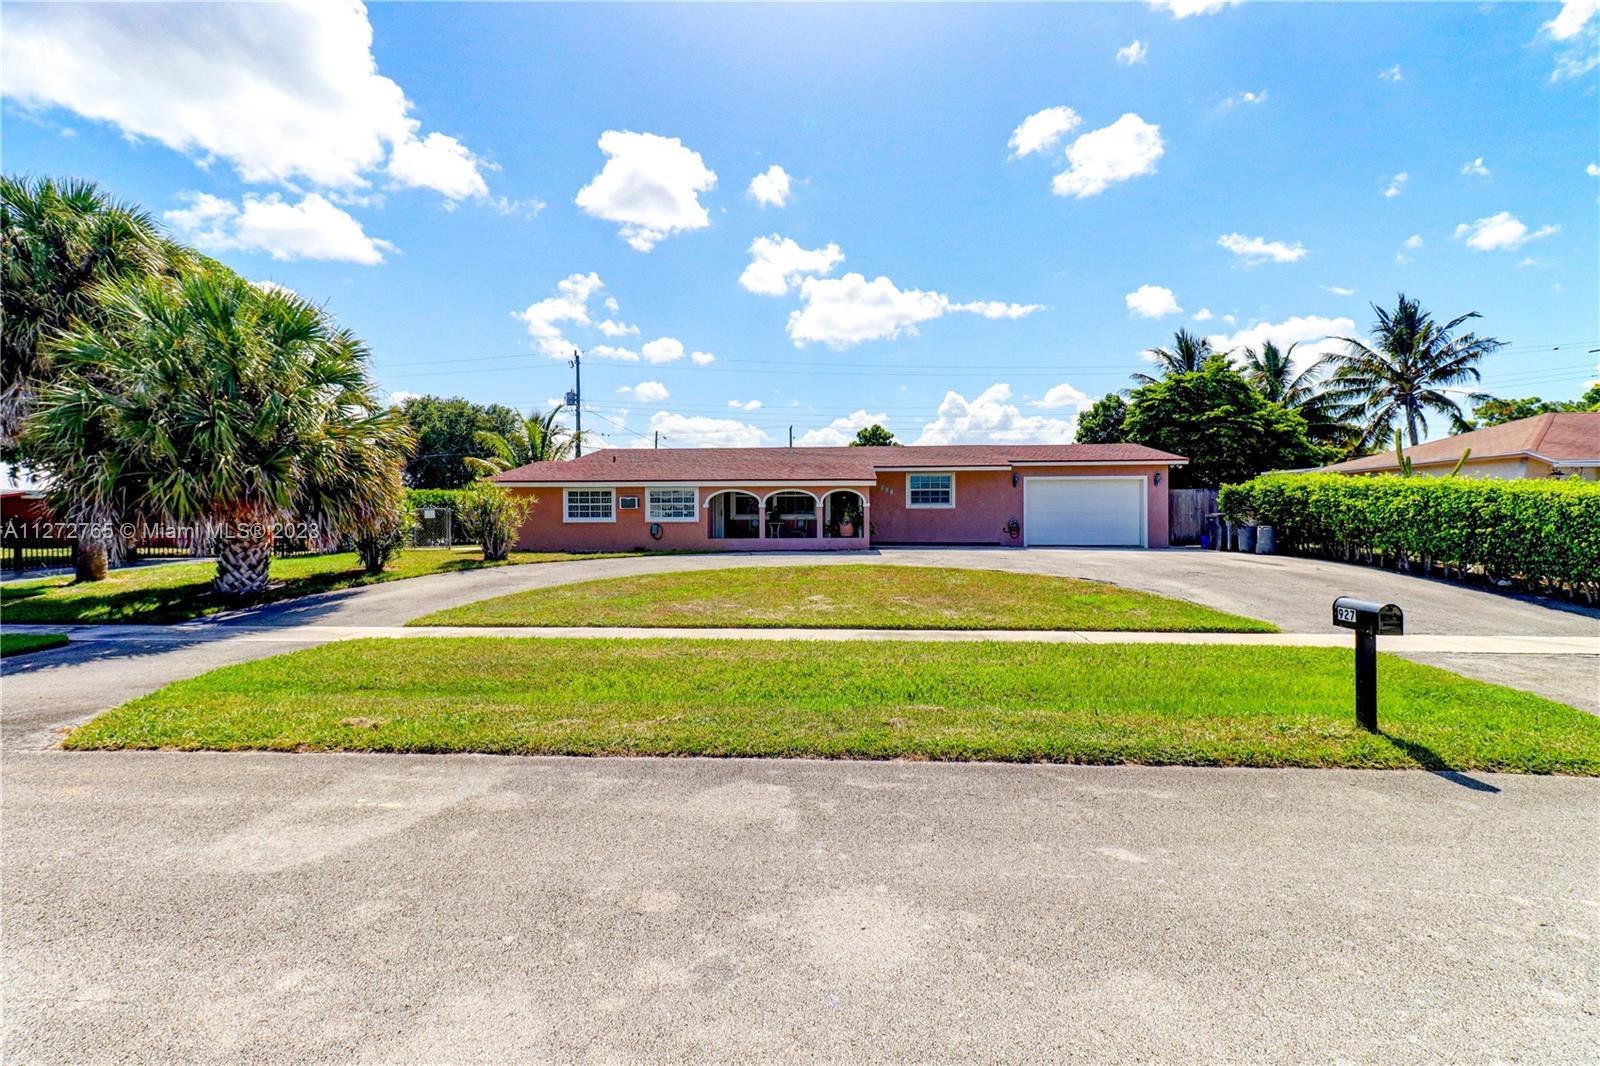 Nestled in West Palm Beach, this charming home sits less than a 15 minutes drive from the Ocean, mak